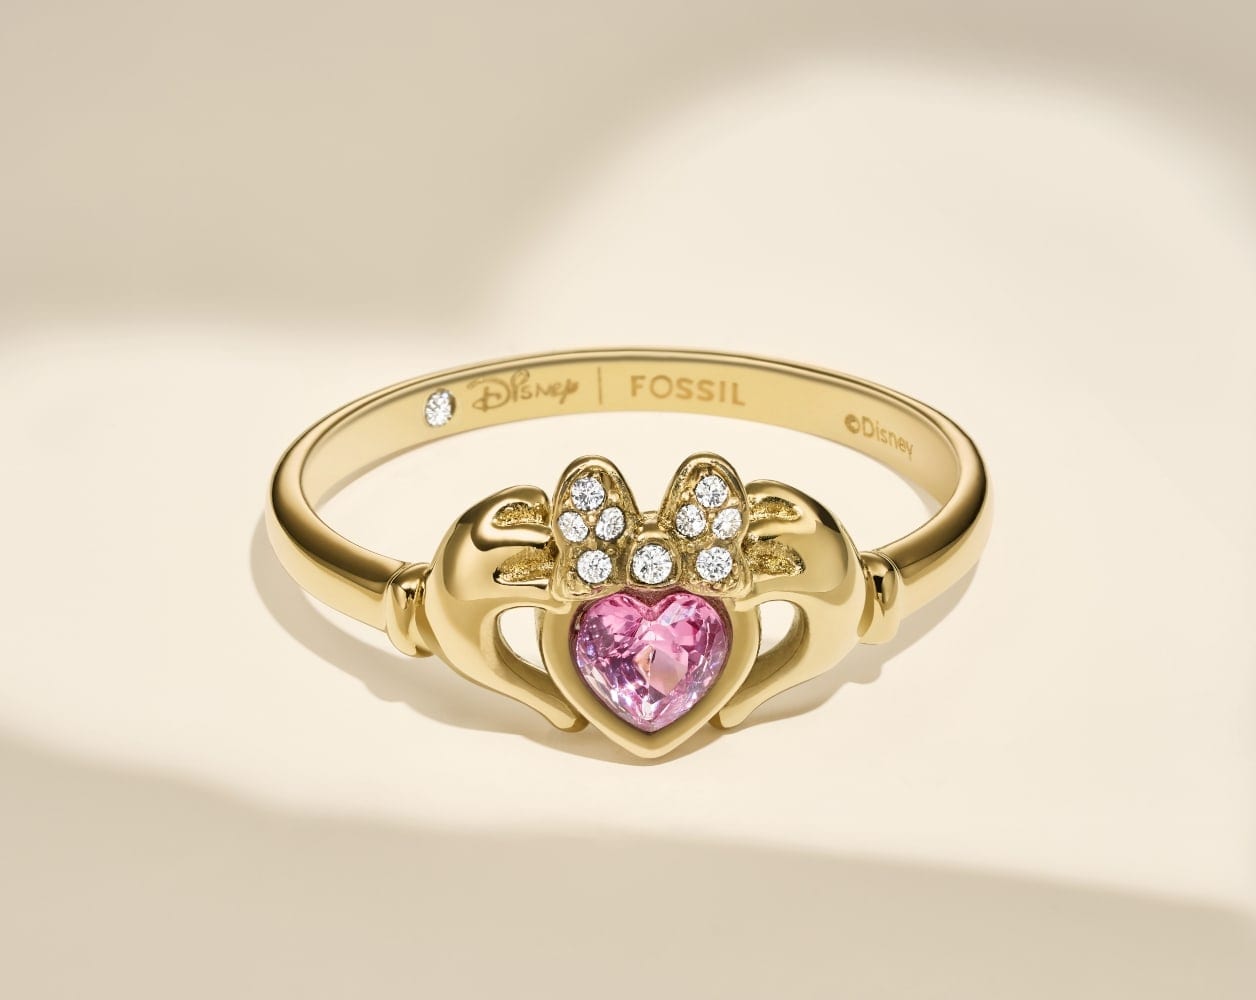 The gold-tone Disney | Fossil Claddagh ring with a pink, heart-shaped crystal.